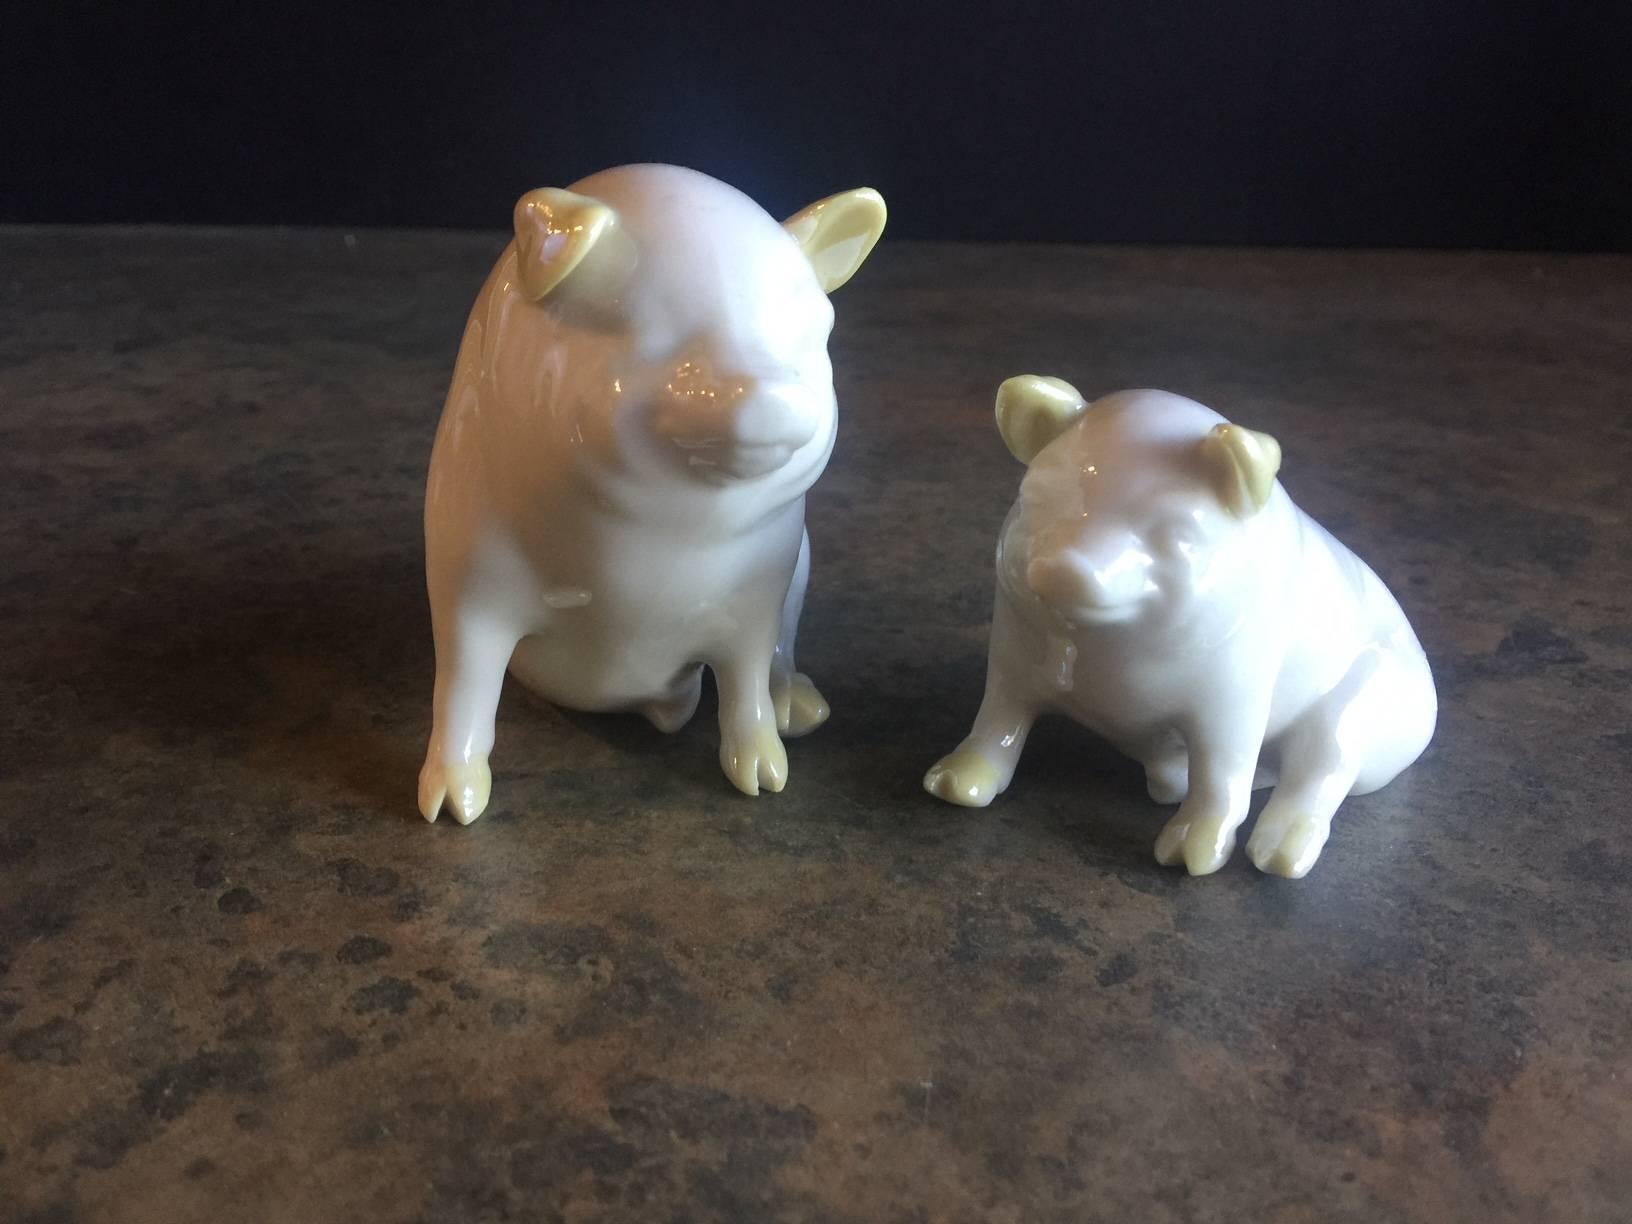 Cute pair of whimsical porcelain pigs by Belleek Pottery Ltd. of Ireland, circa 1980s. The large pig is 3